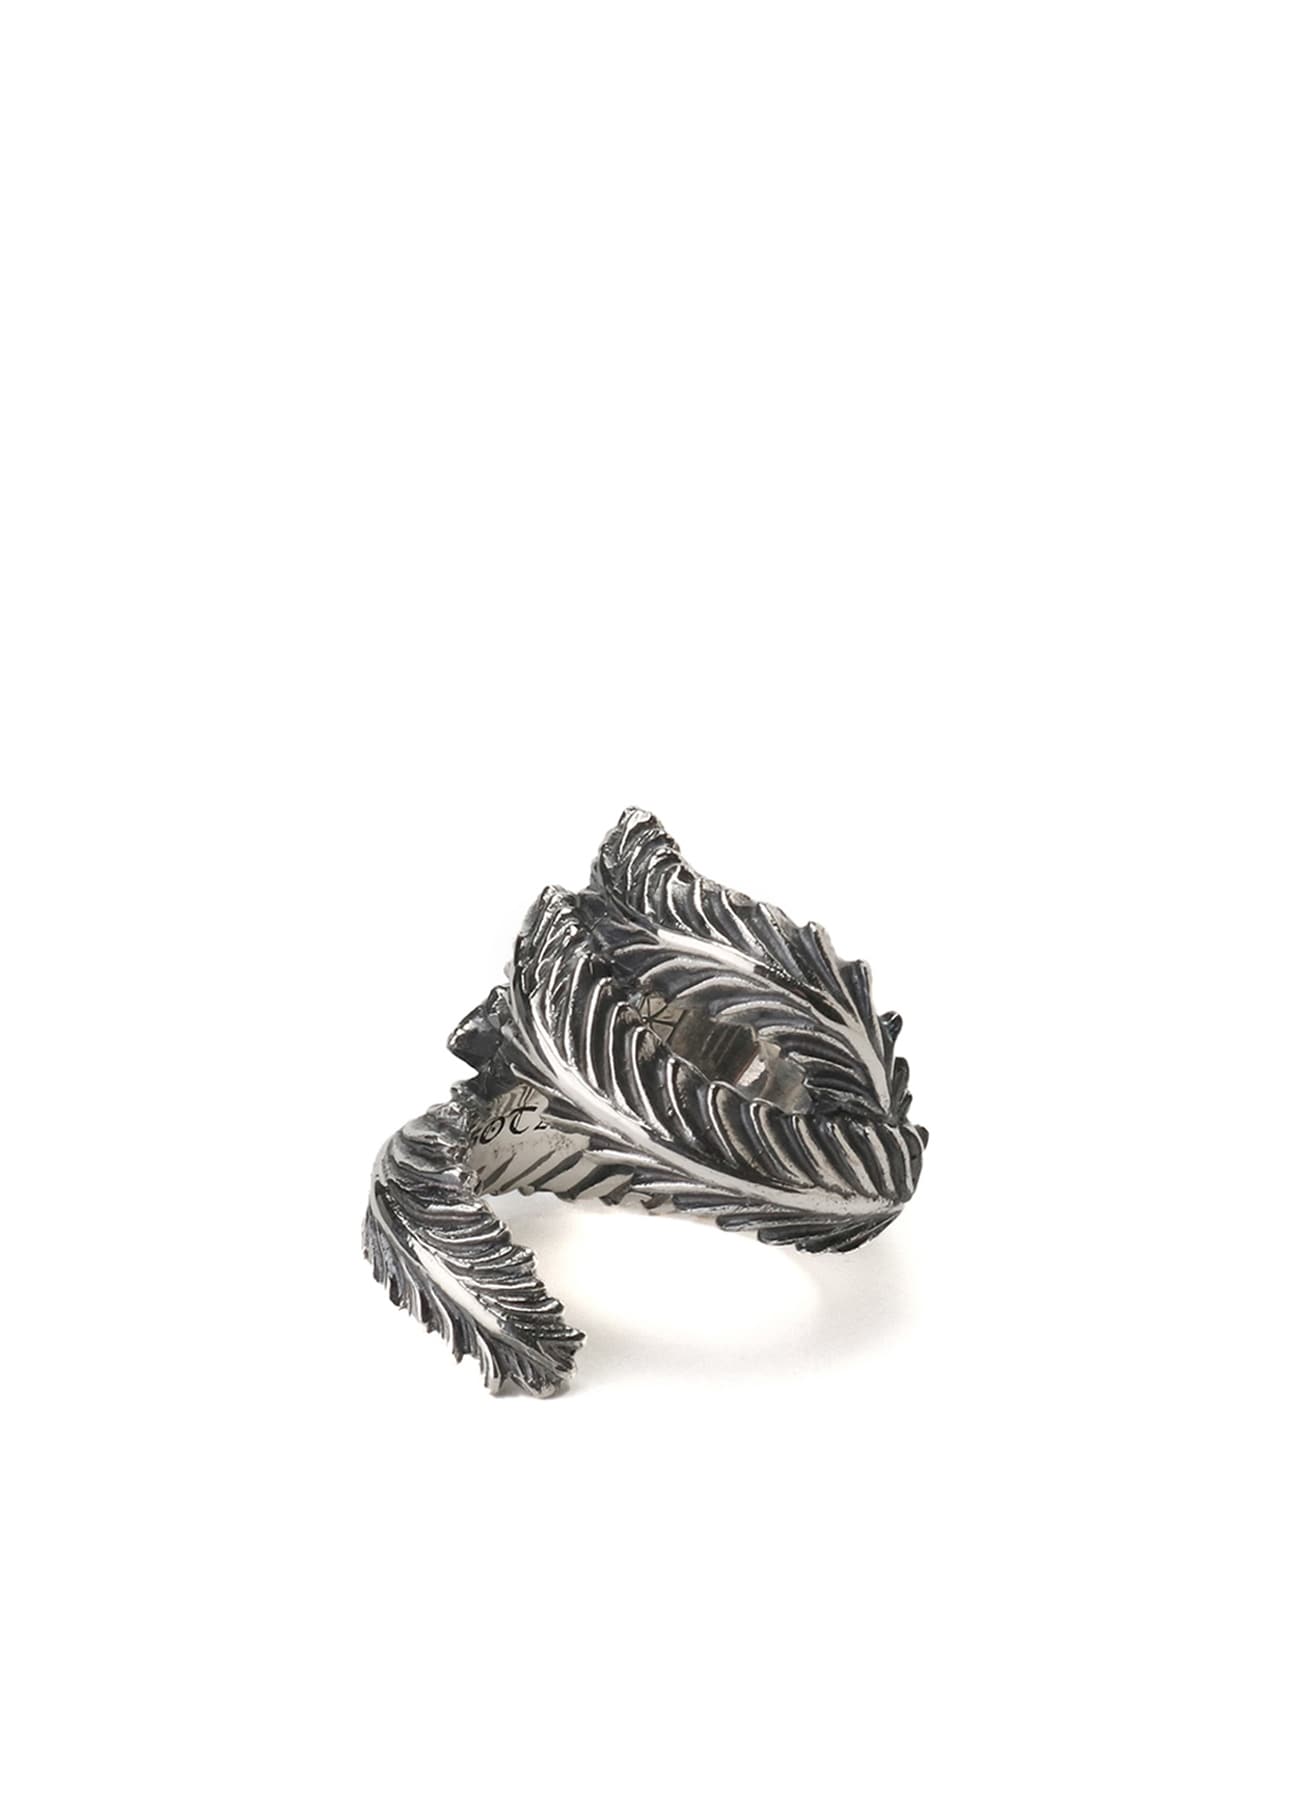 SILVER 950 FEATHER RING